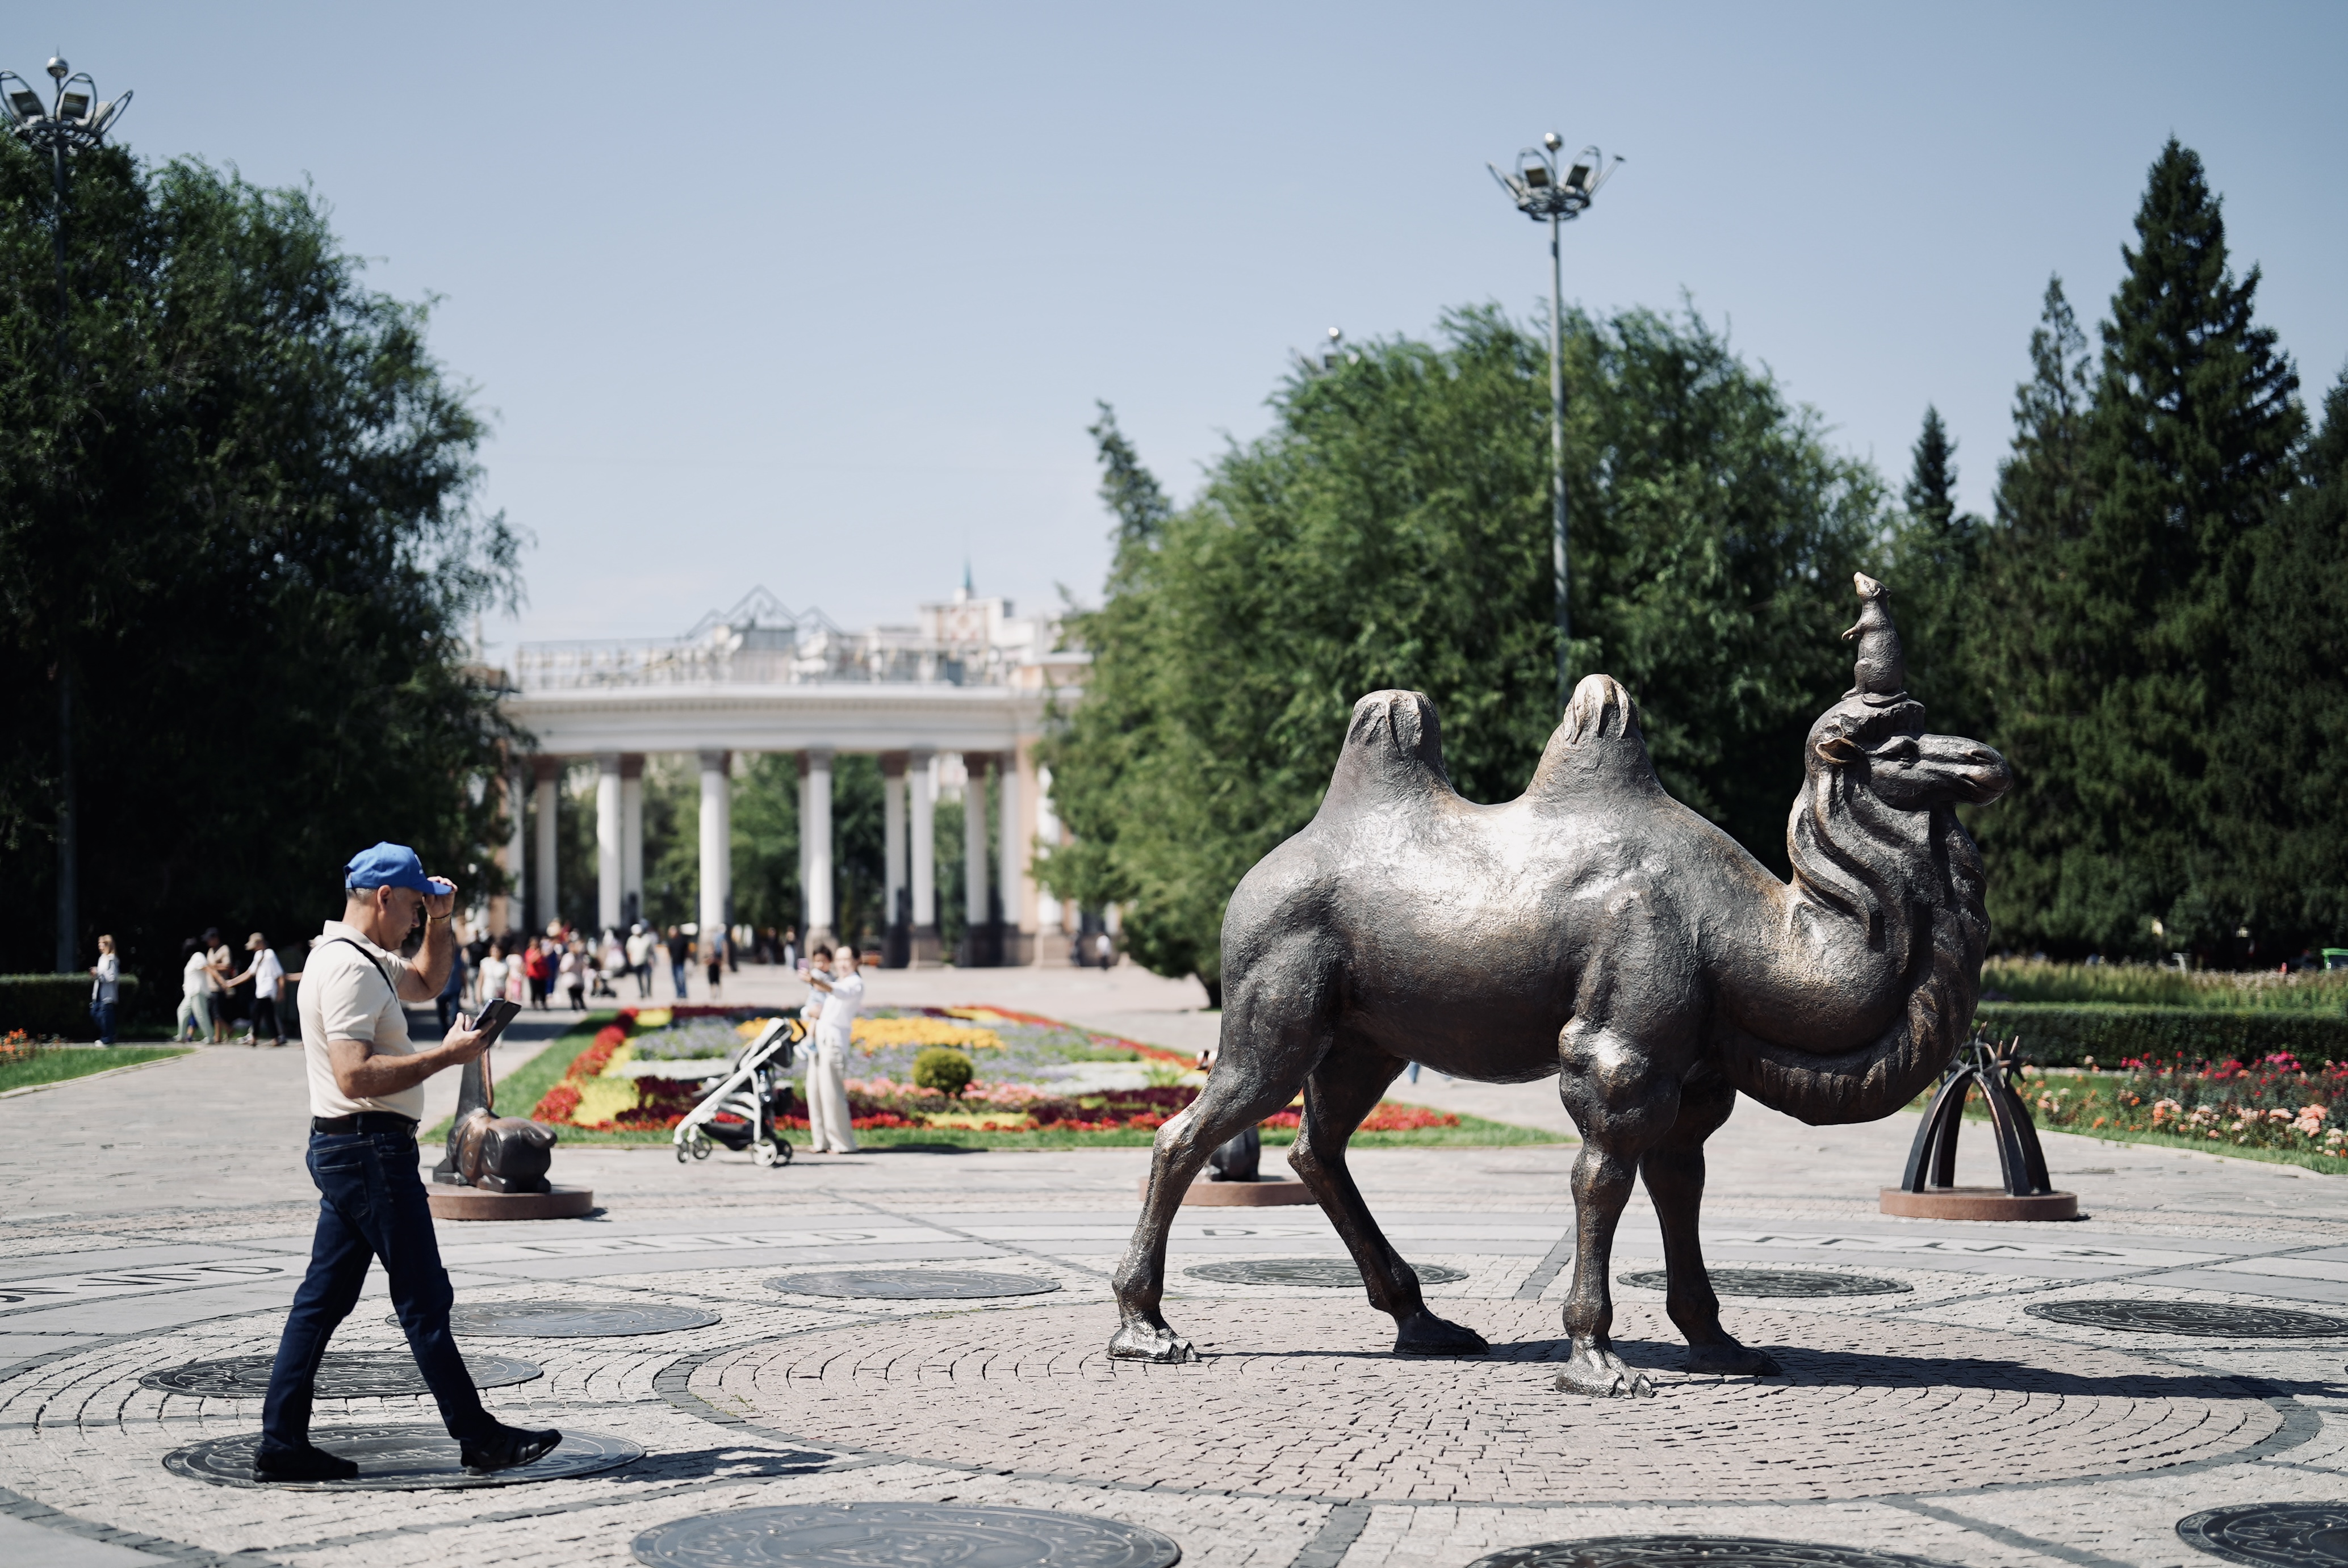 Residents enjoy their leisure time at a square in Almaty, a key hub for finance, technology, education, culture and transport in Kazakhstan and the wider Central Asian region. /CGTN